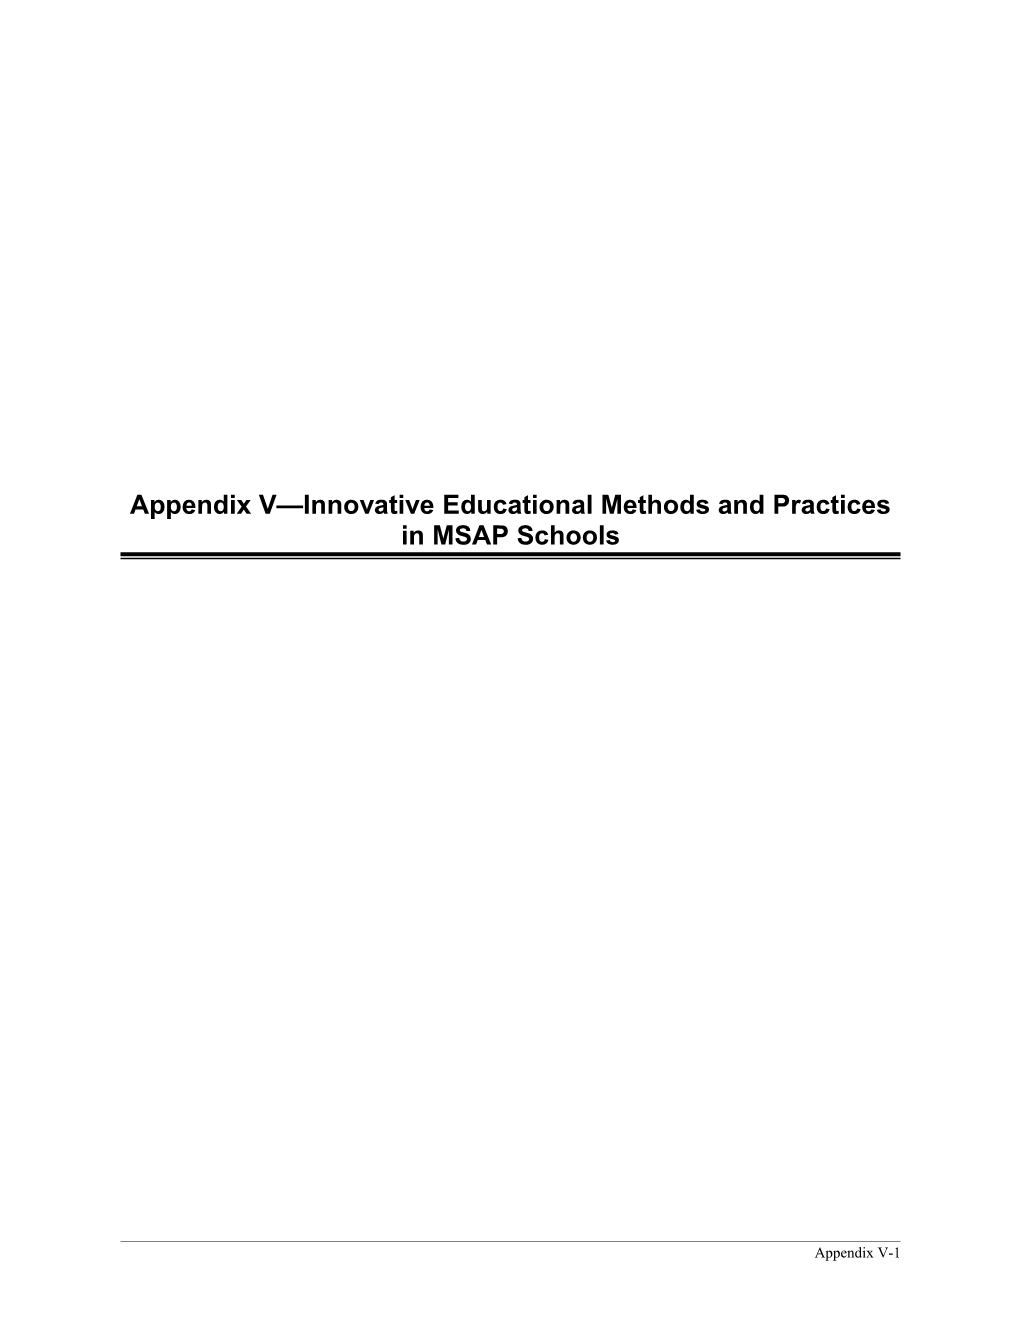 Appendix V Innovative Educational Methods and Practices in MSAP Schools